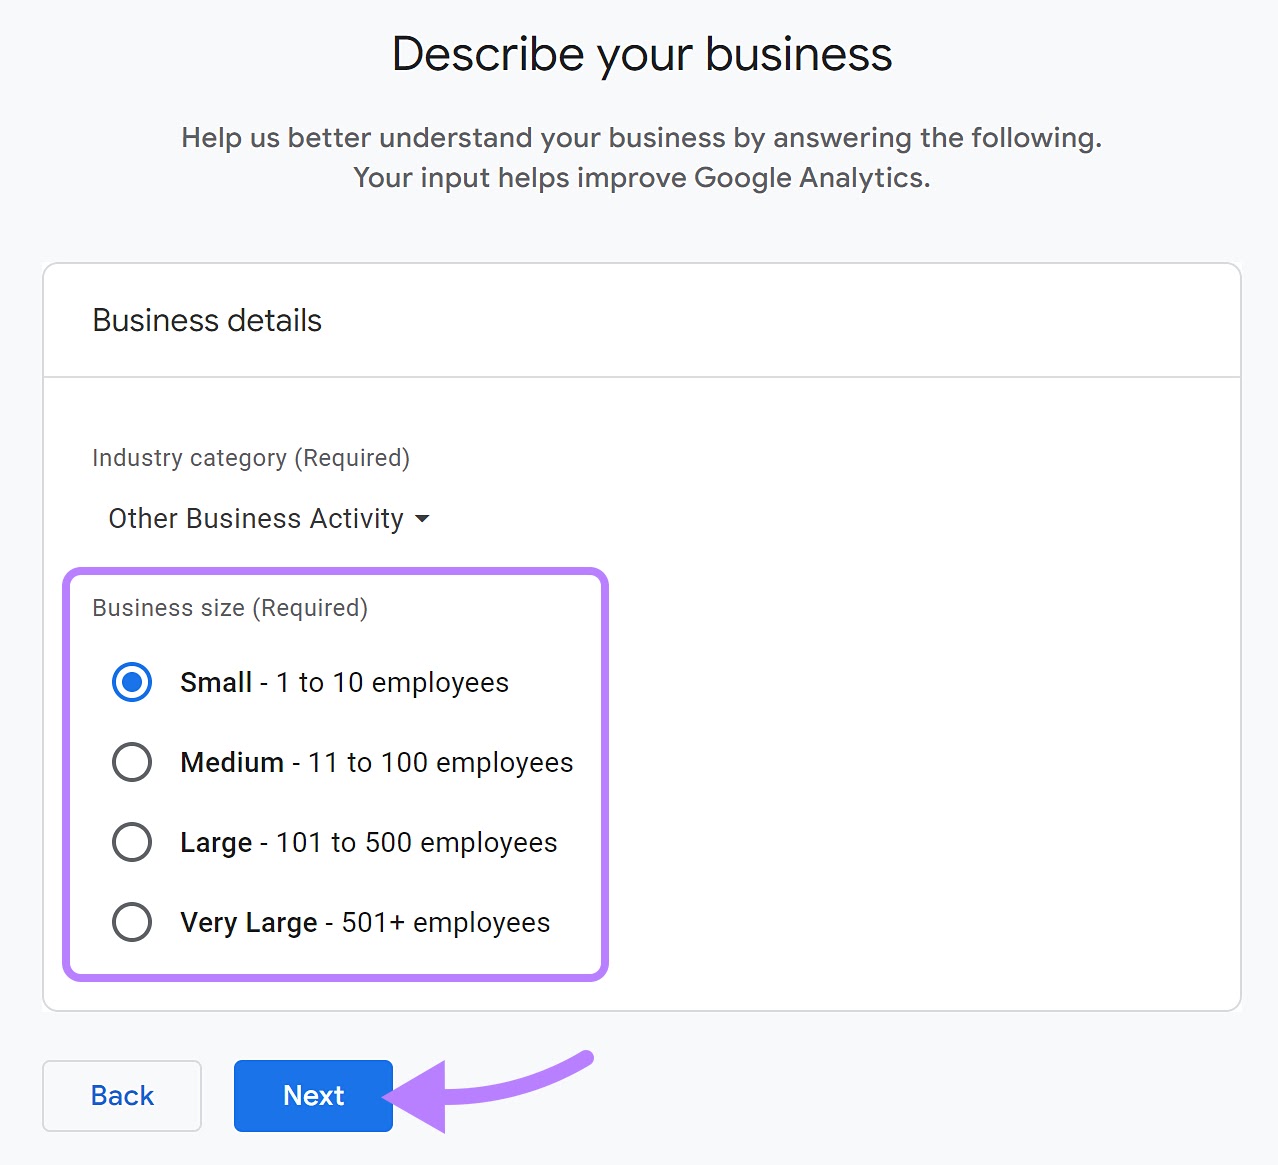 "Small - 1 to 10 employees" options selected nether  "Business size" drop-down menu